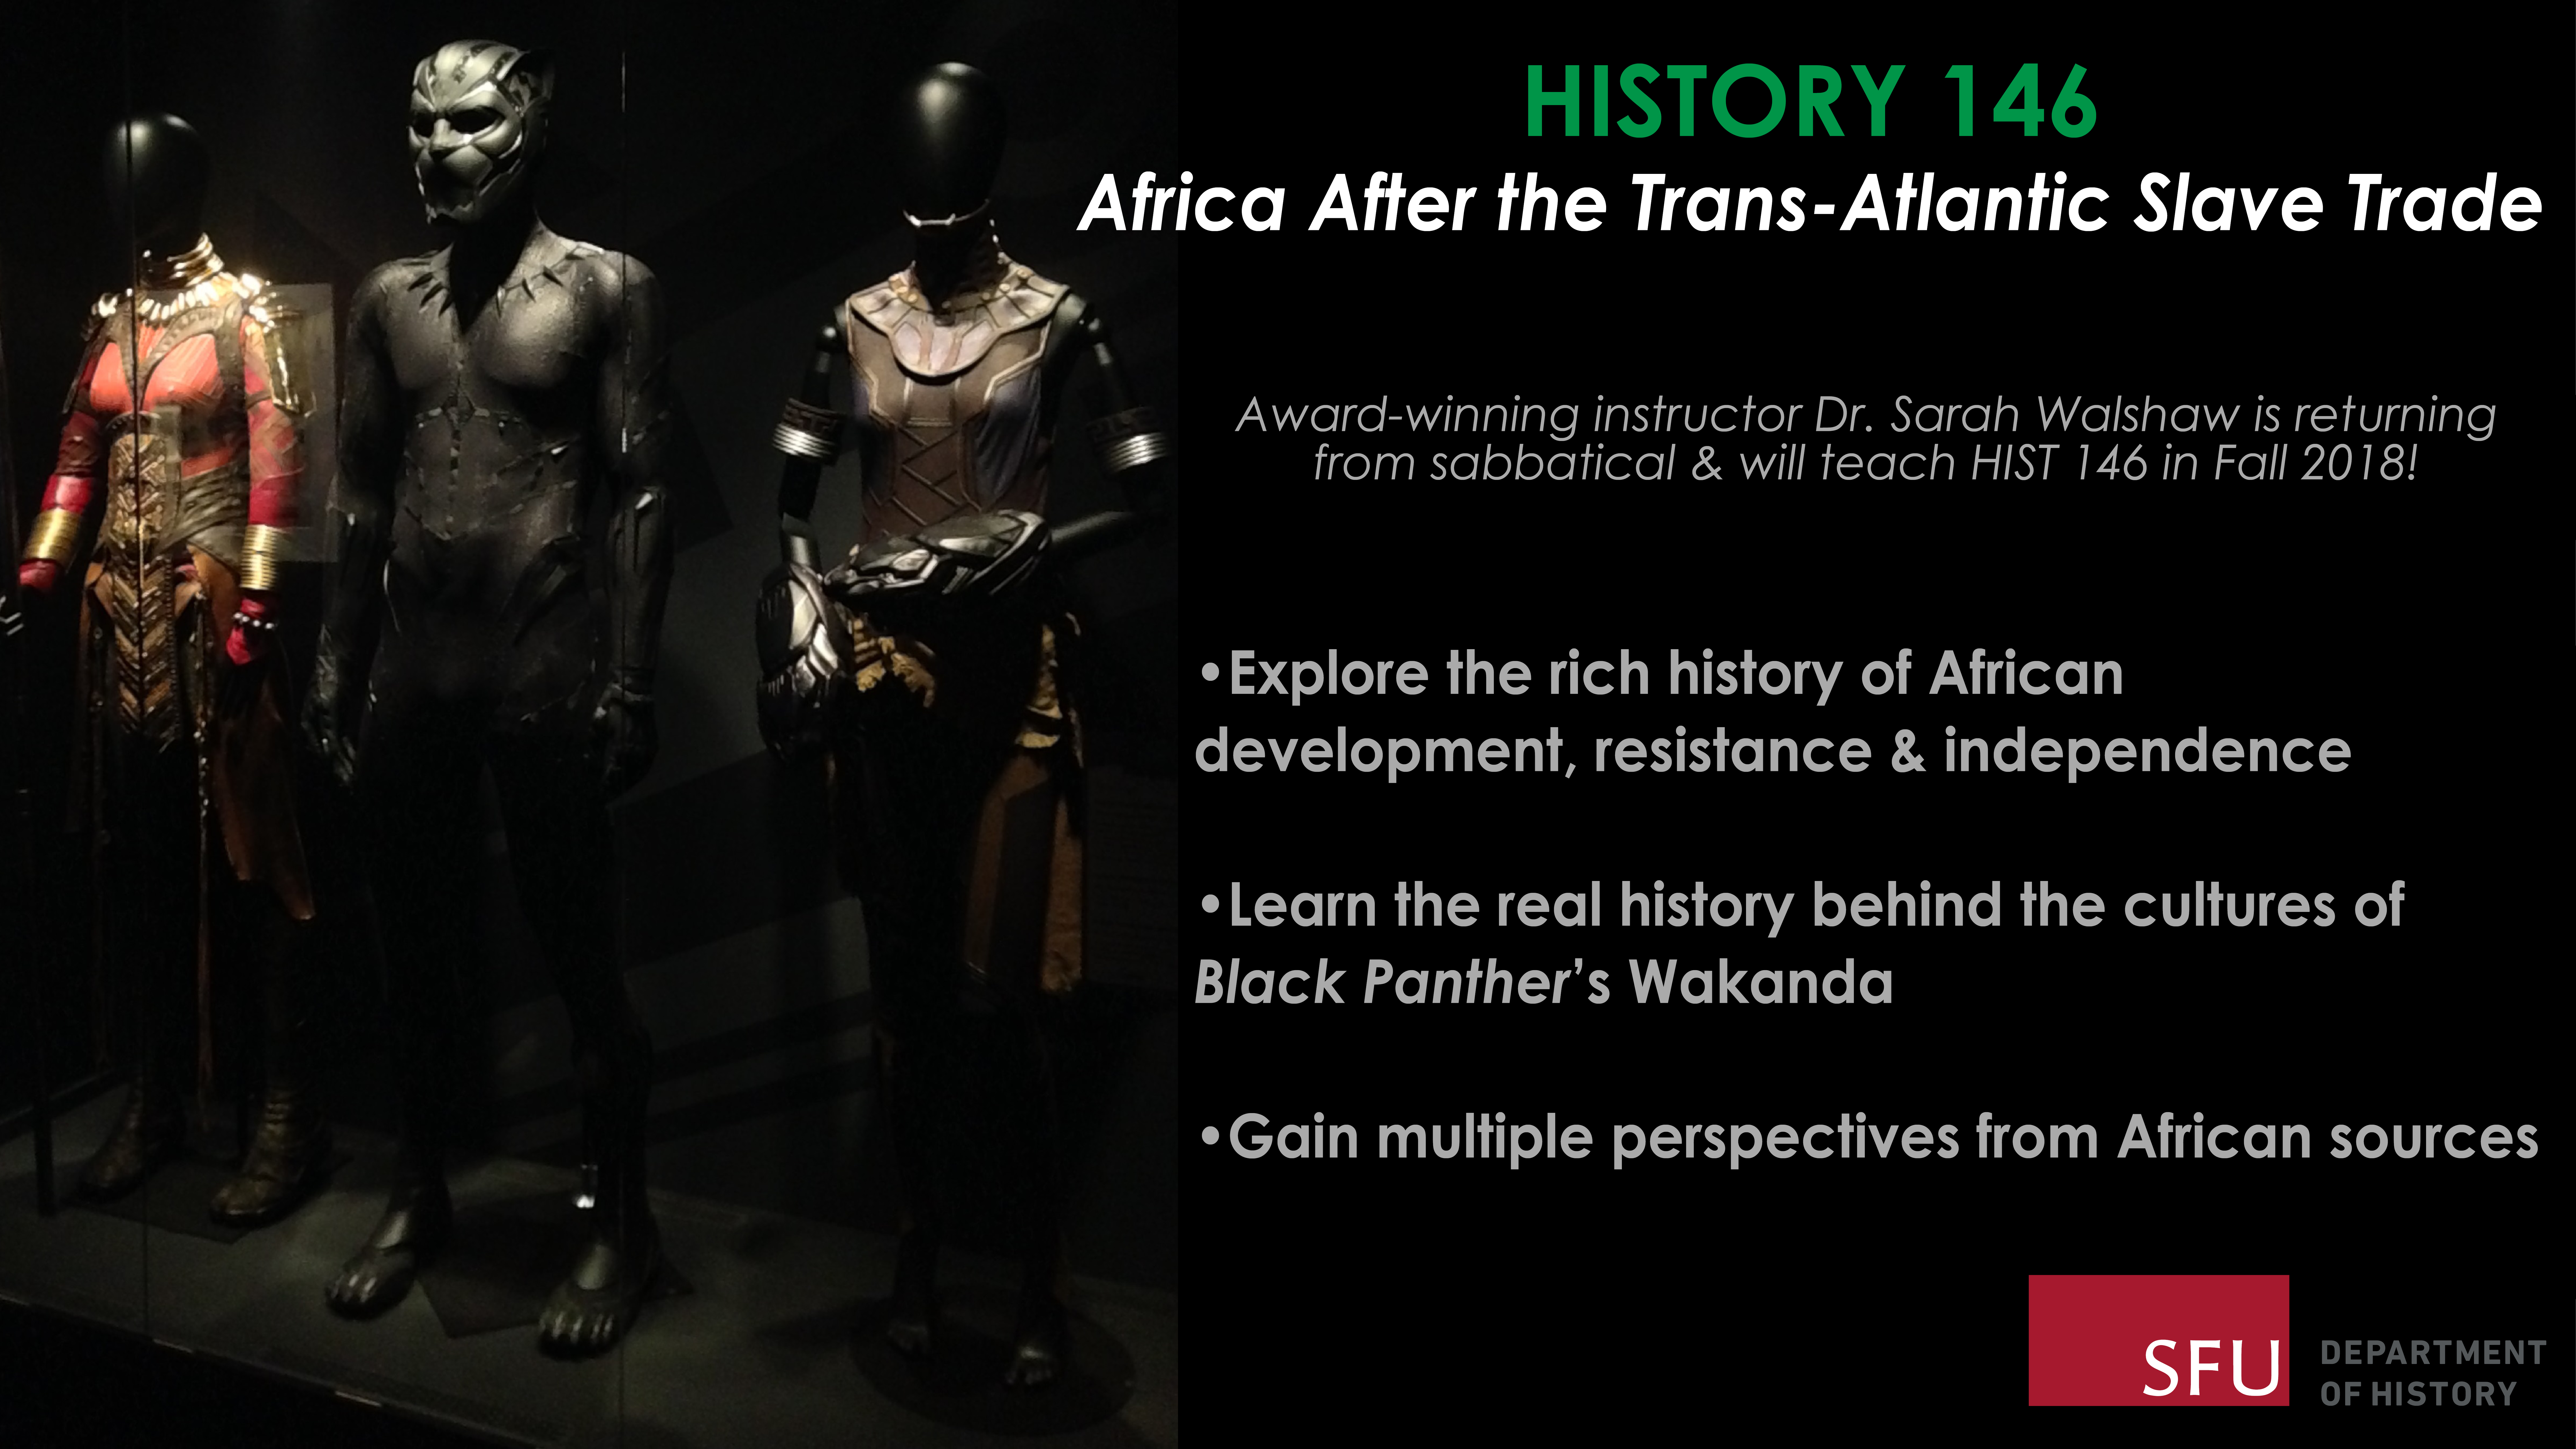 HIST 146 Africa After the Trans-Atlantic Slave Trade